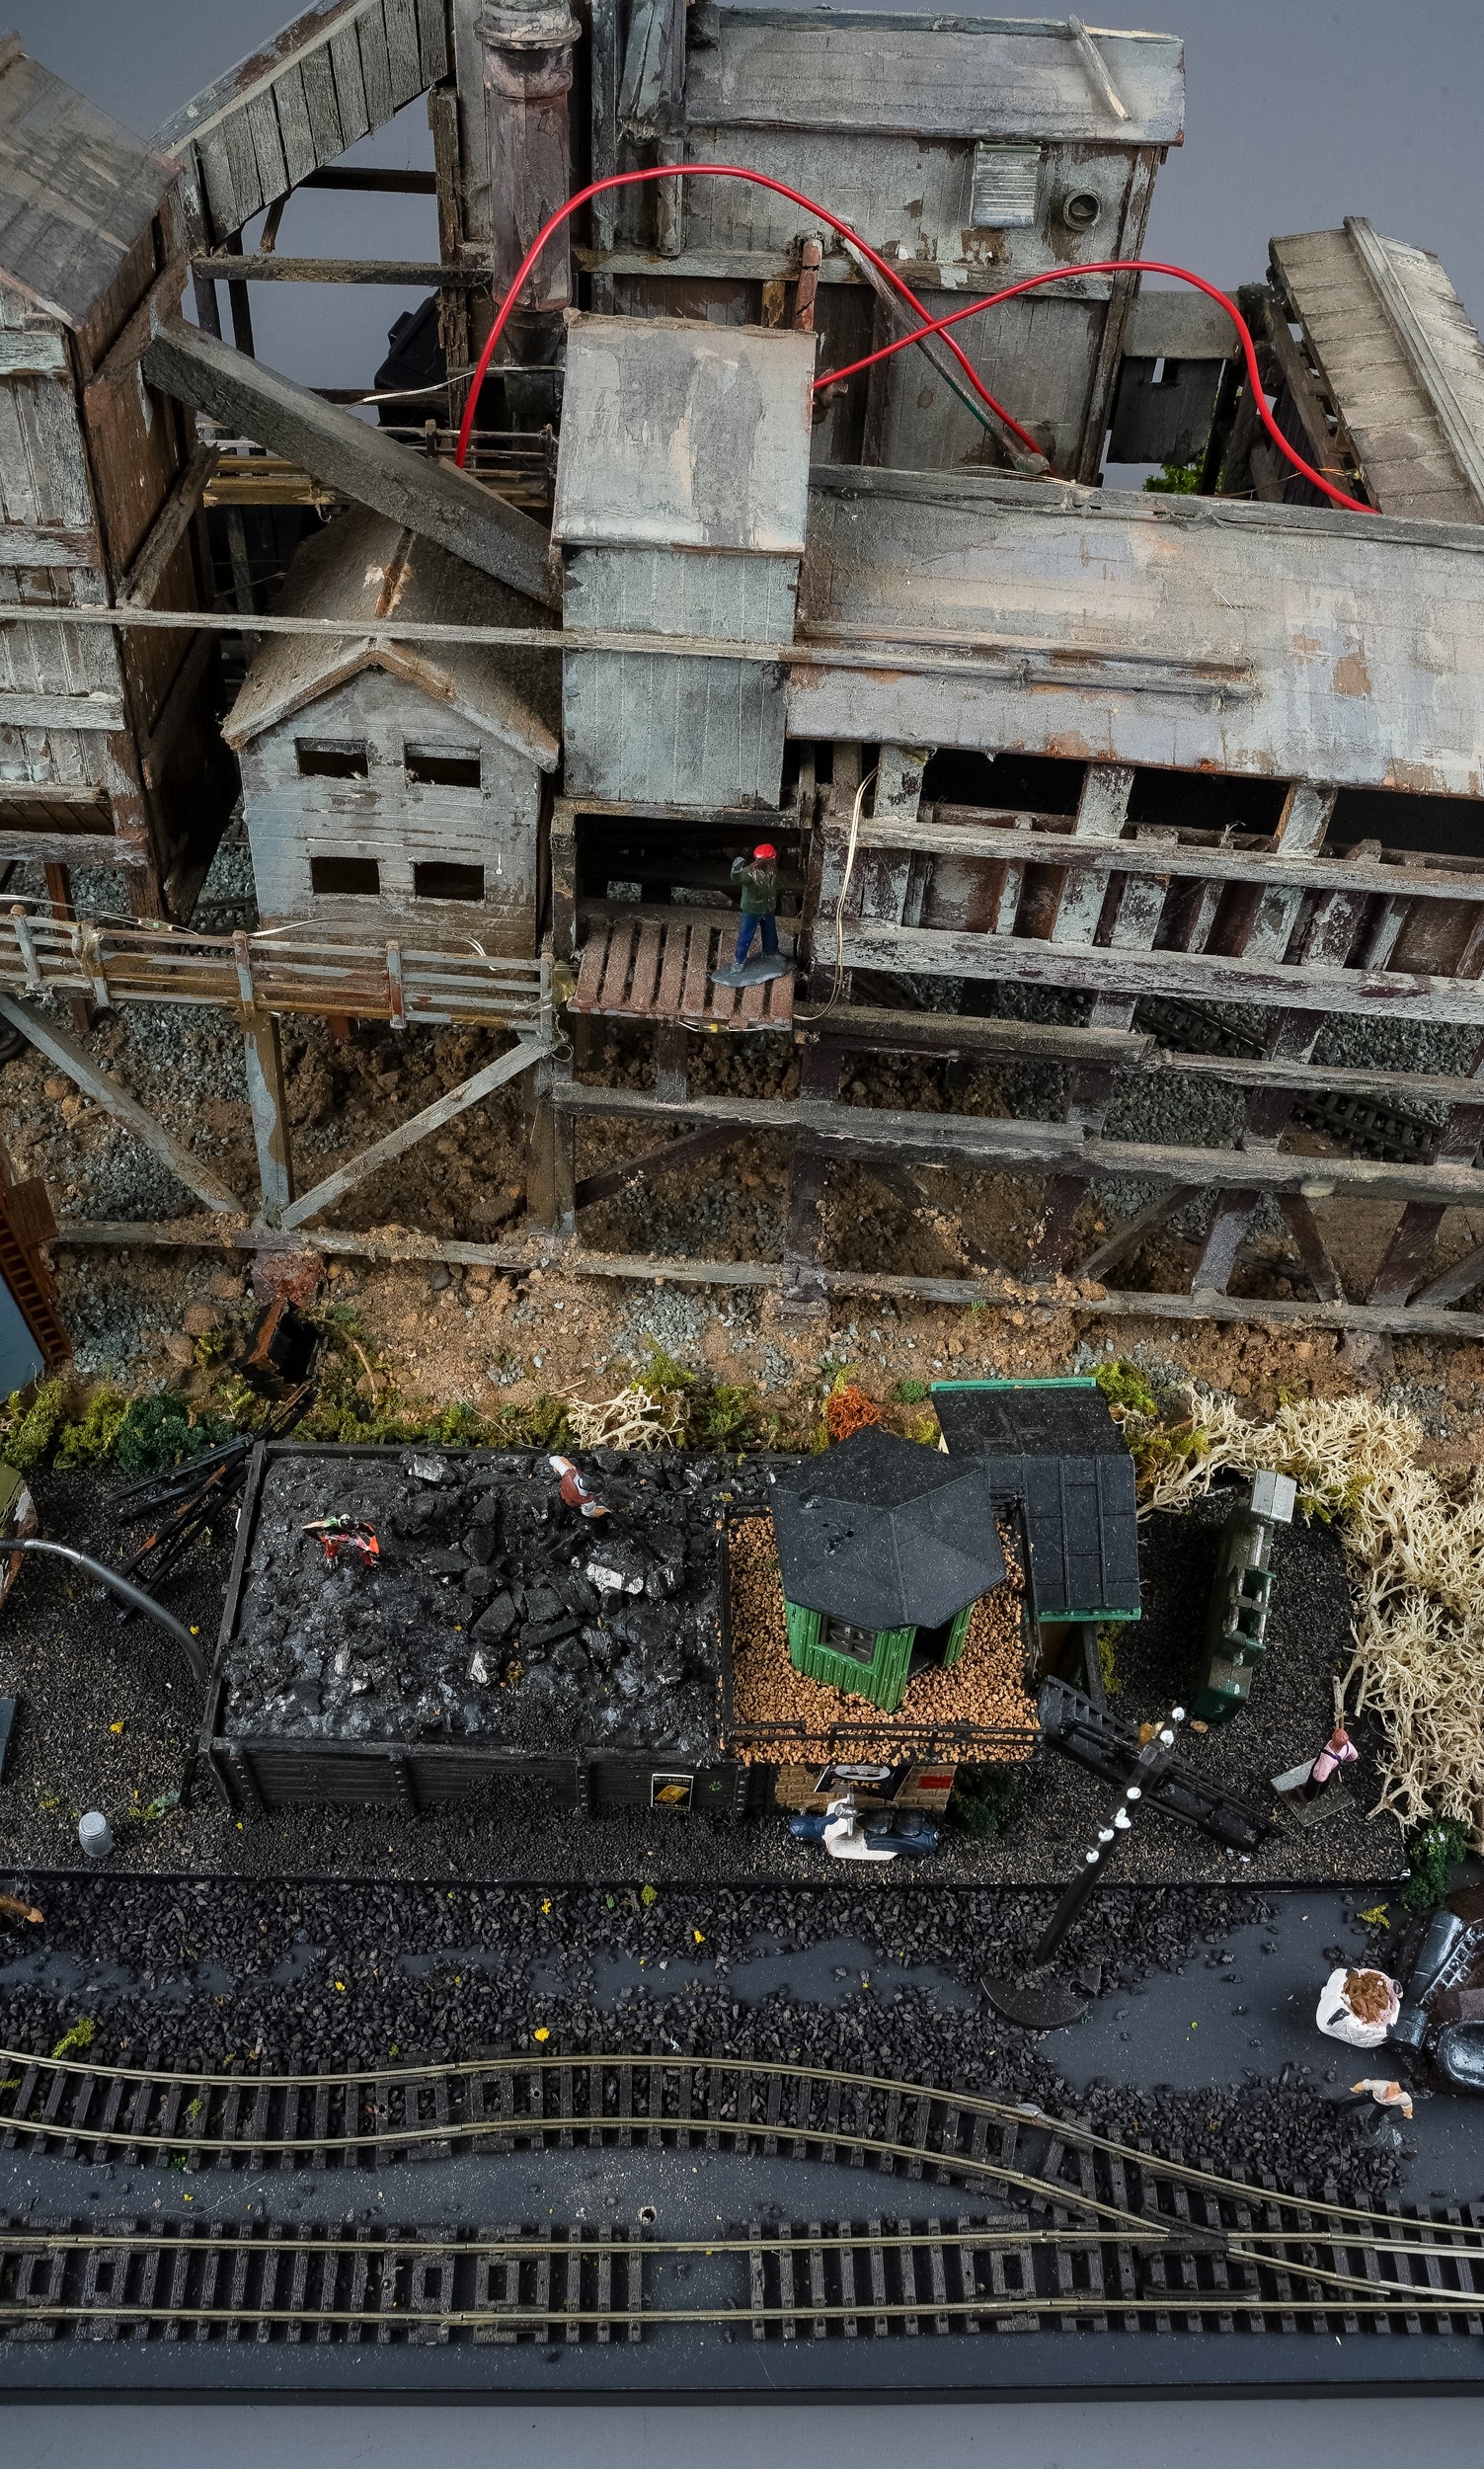 A model railway N gauge layout board containing diorama depicting coal mine processing plant with - Image 7 of 9